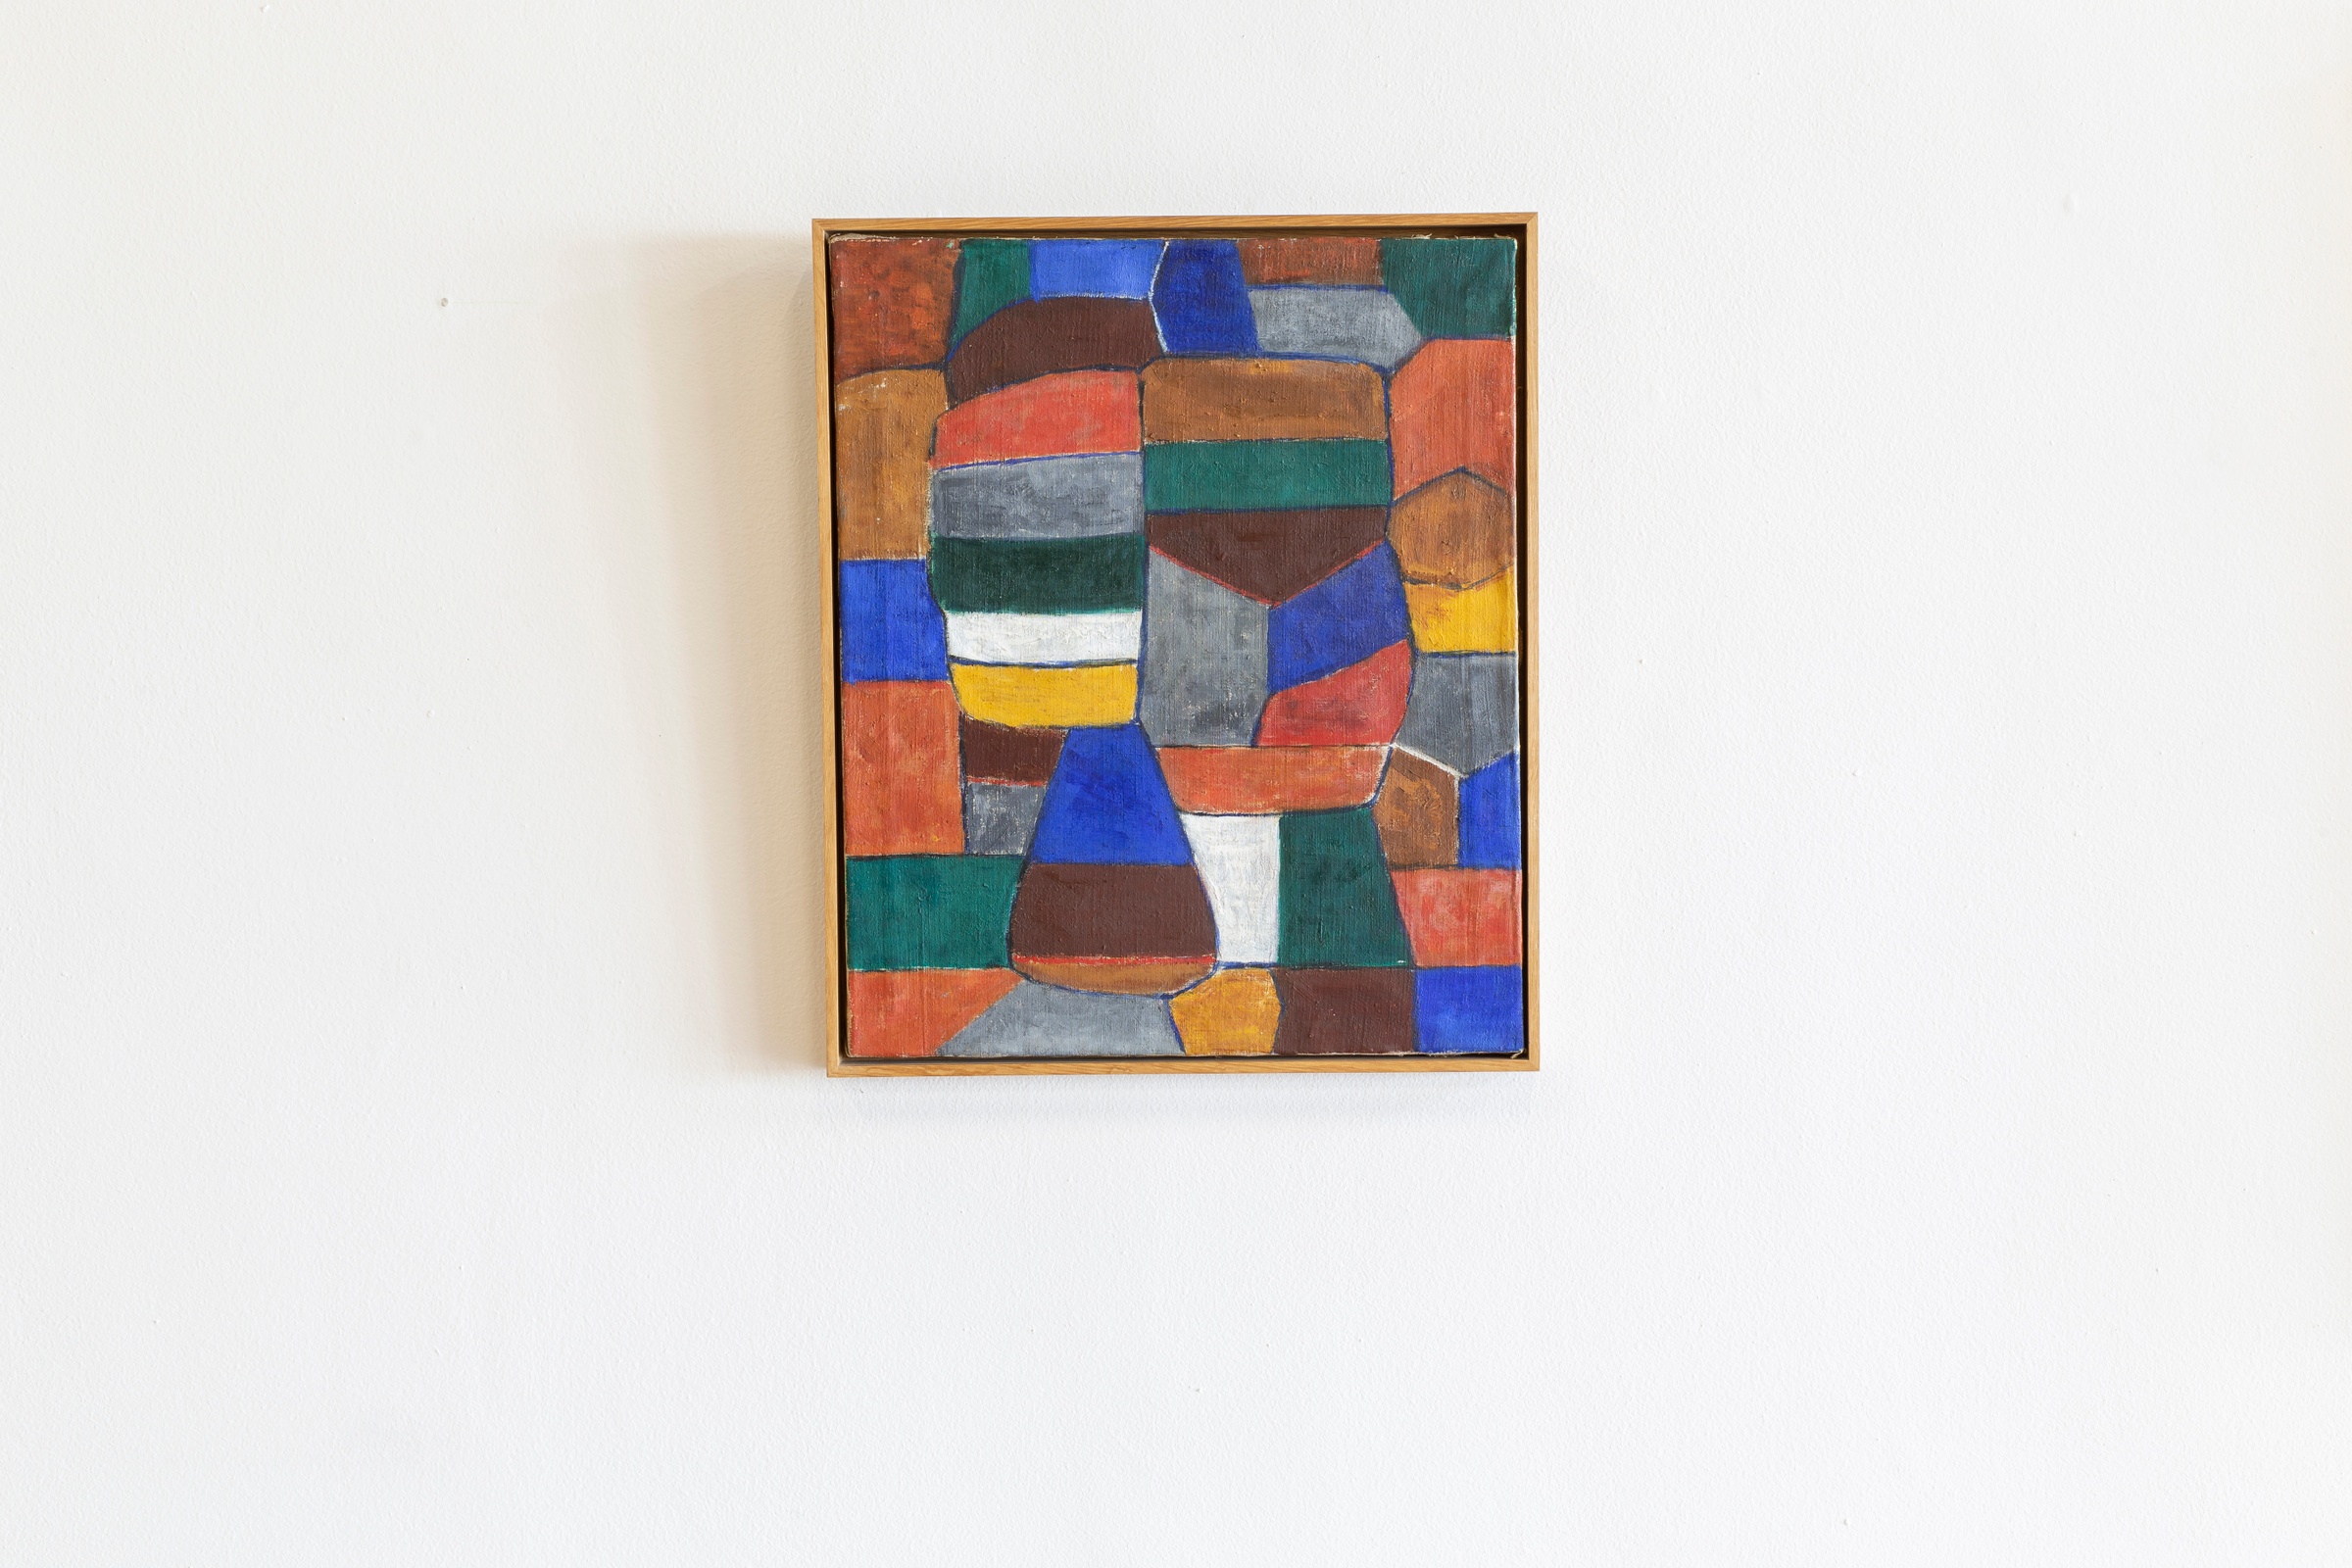 Photograph of Ernest Mancoba's oil on canvas work, 'Untitled (1951)'.
